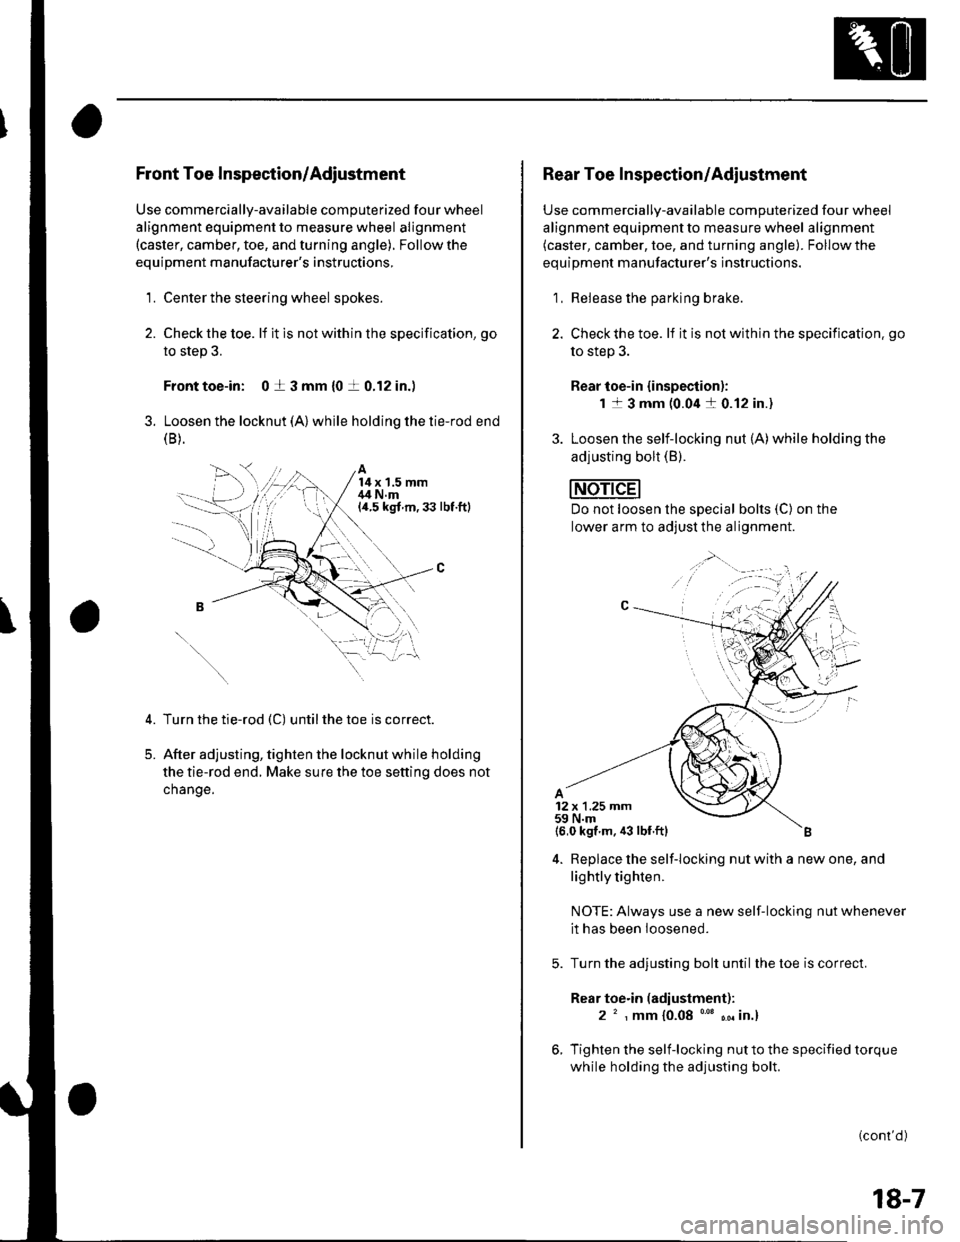 HONDA CIVIC 2003 7.G Service Manual Front Toe Inspection/Adjustment
Use commercially-available computerized four wheel
alignment equipment to measure wheel alignment(caster, camber, toe, and turning angle). Follow the
equipment manufact